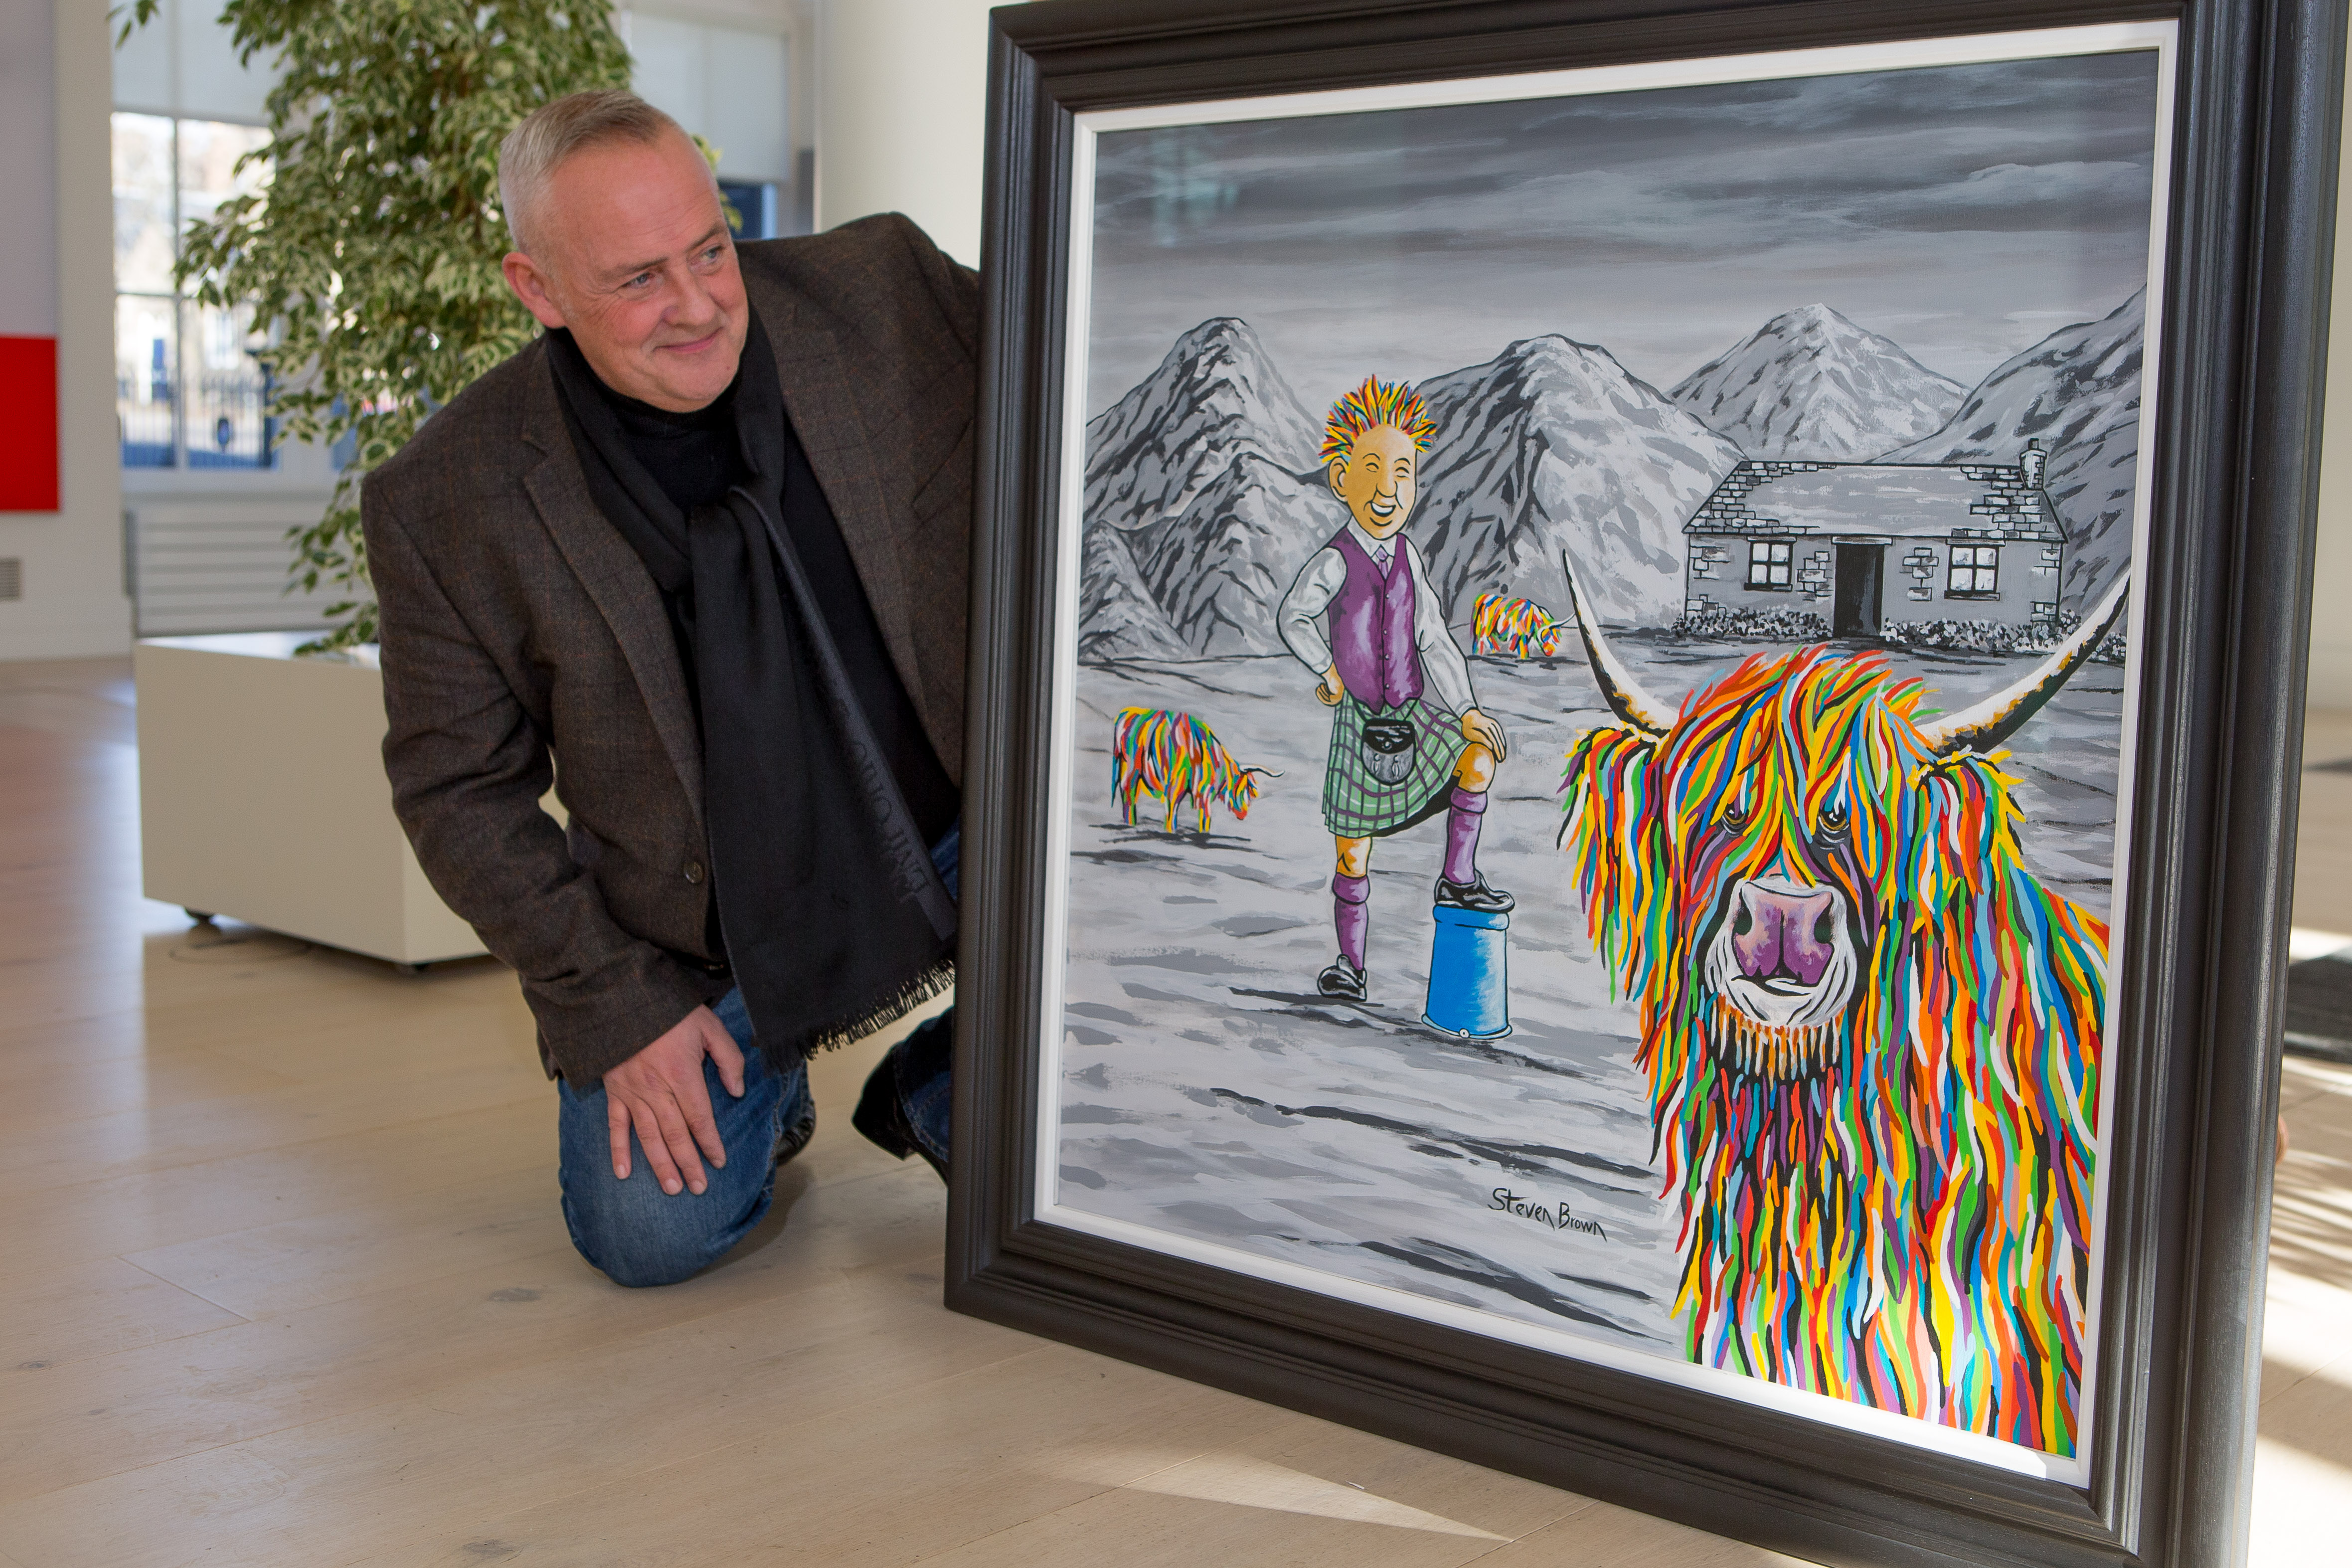 Artist Steven Brown with a special artwork depicting McCoo and Oor Wullie, commissioned by DC Thomson.